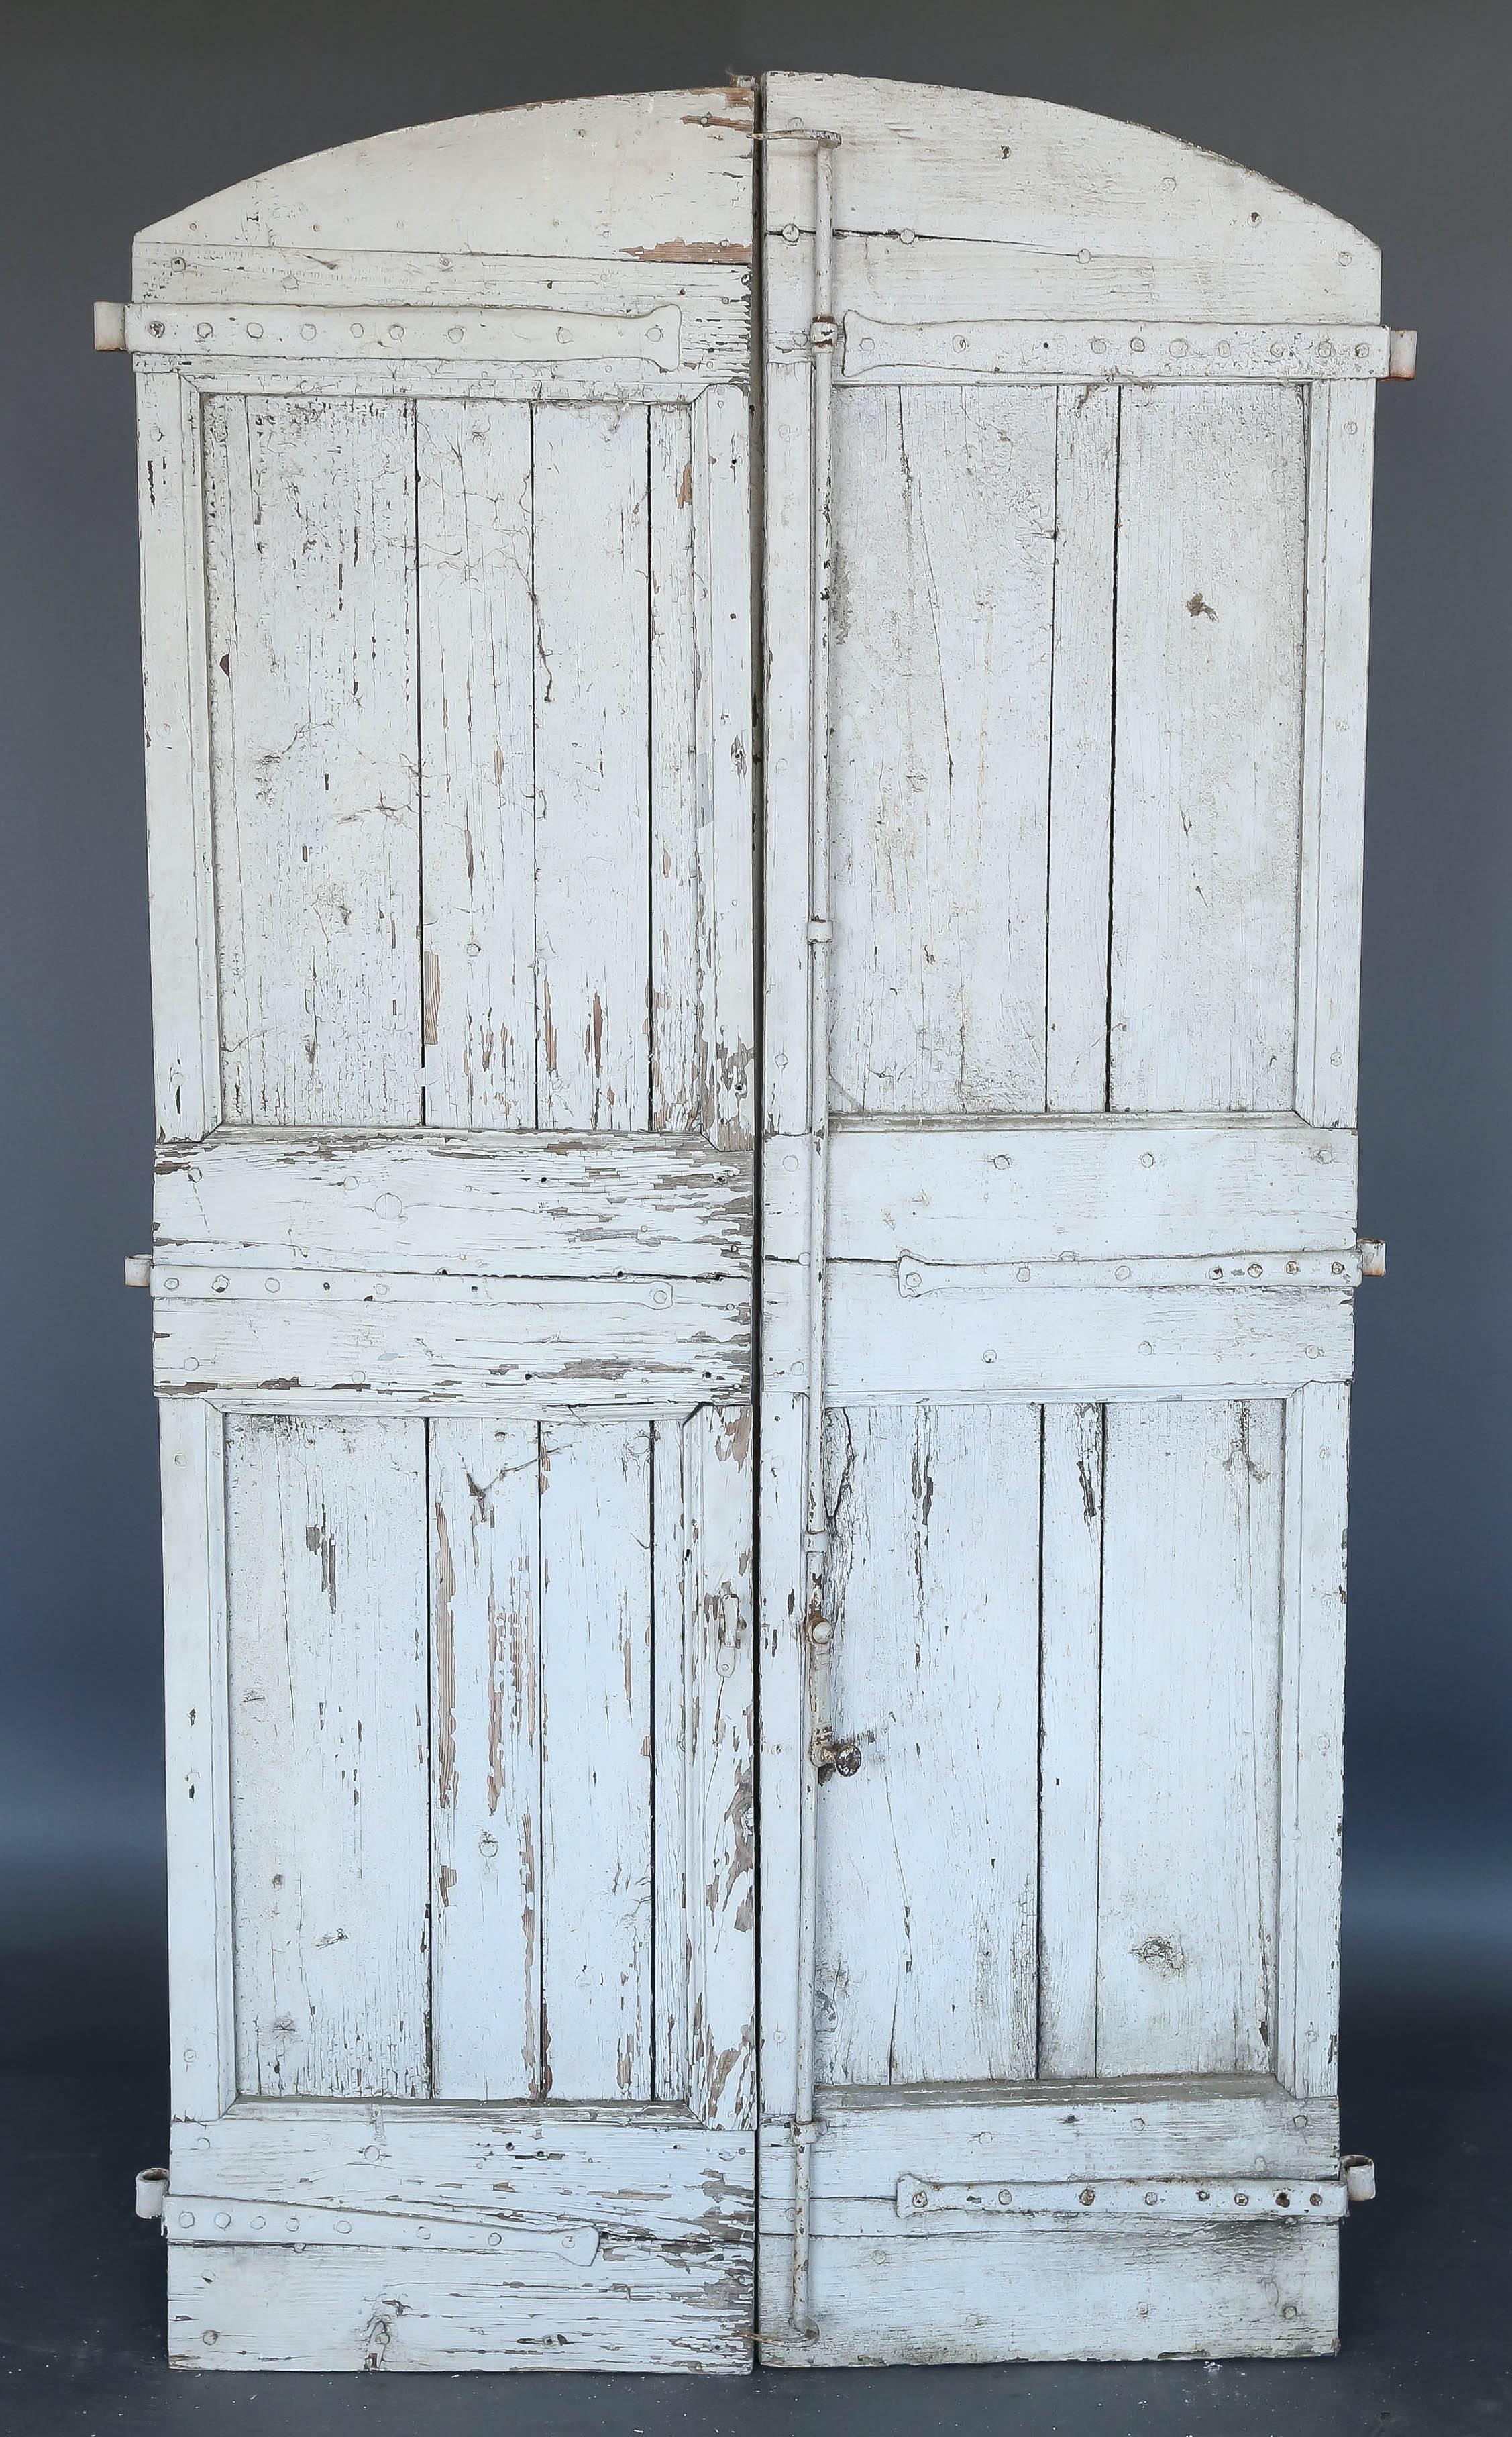 Pair of 18th century. French eyebrow shape shutters with original hardware scraped white paint. Wonderful weathered patina. The weathered look is from years of exposure to the elements. The shutters are sturdy. They would make wonderful doors.